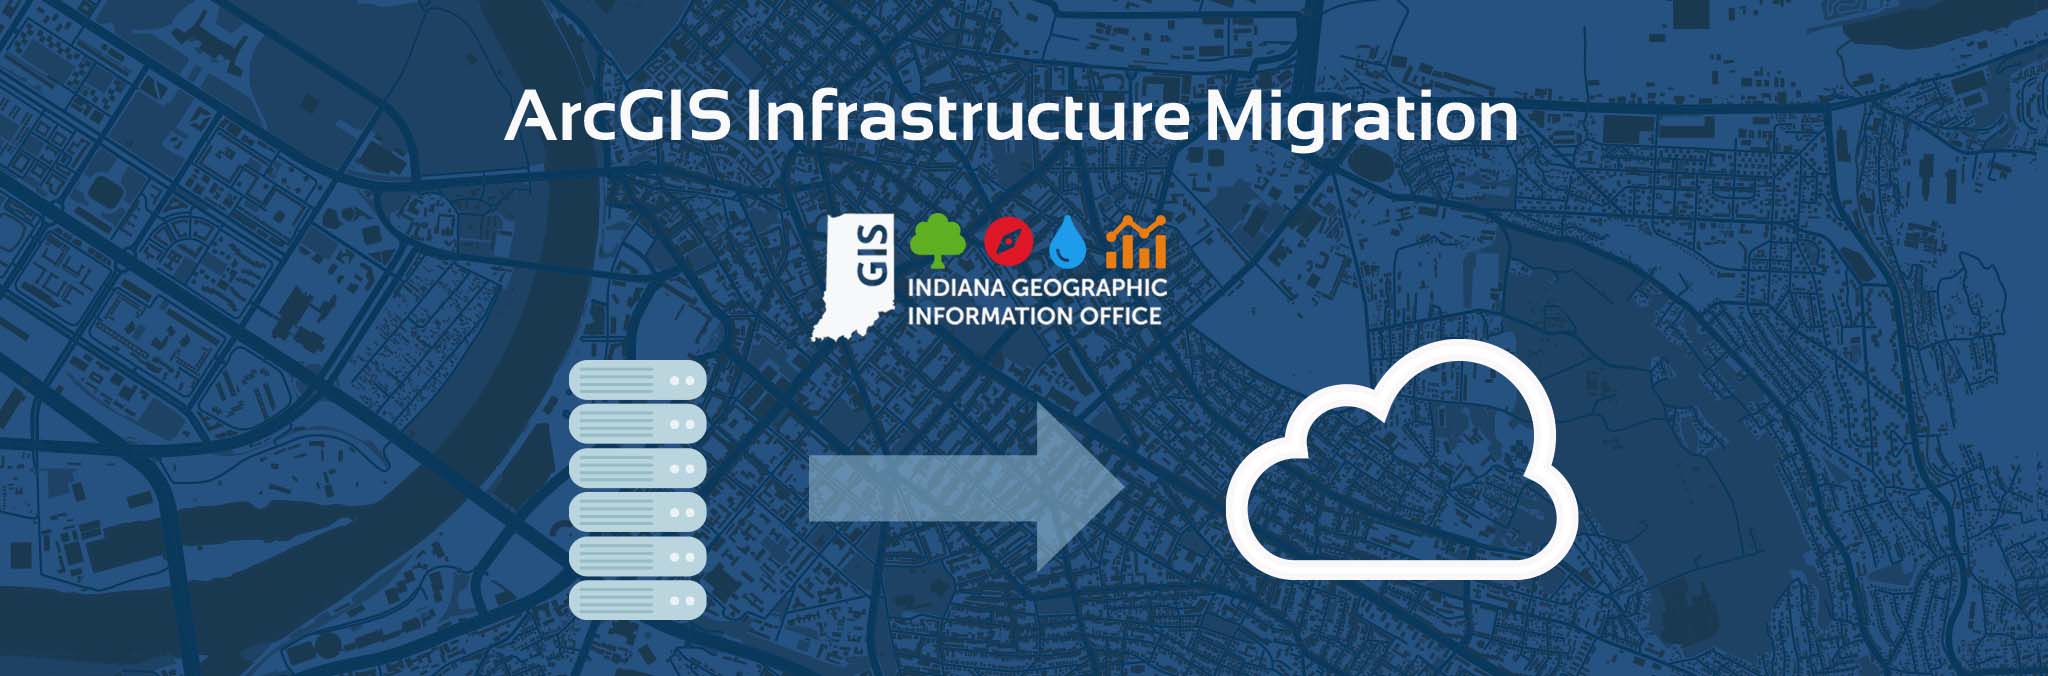 ArcGIS Infrastructure Migration for the Indiana Geographic Information Office